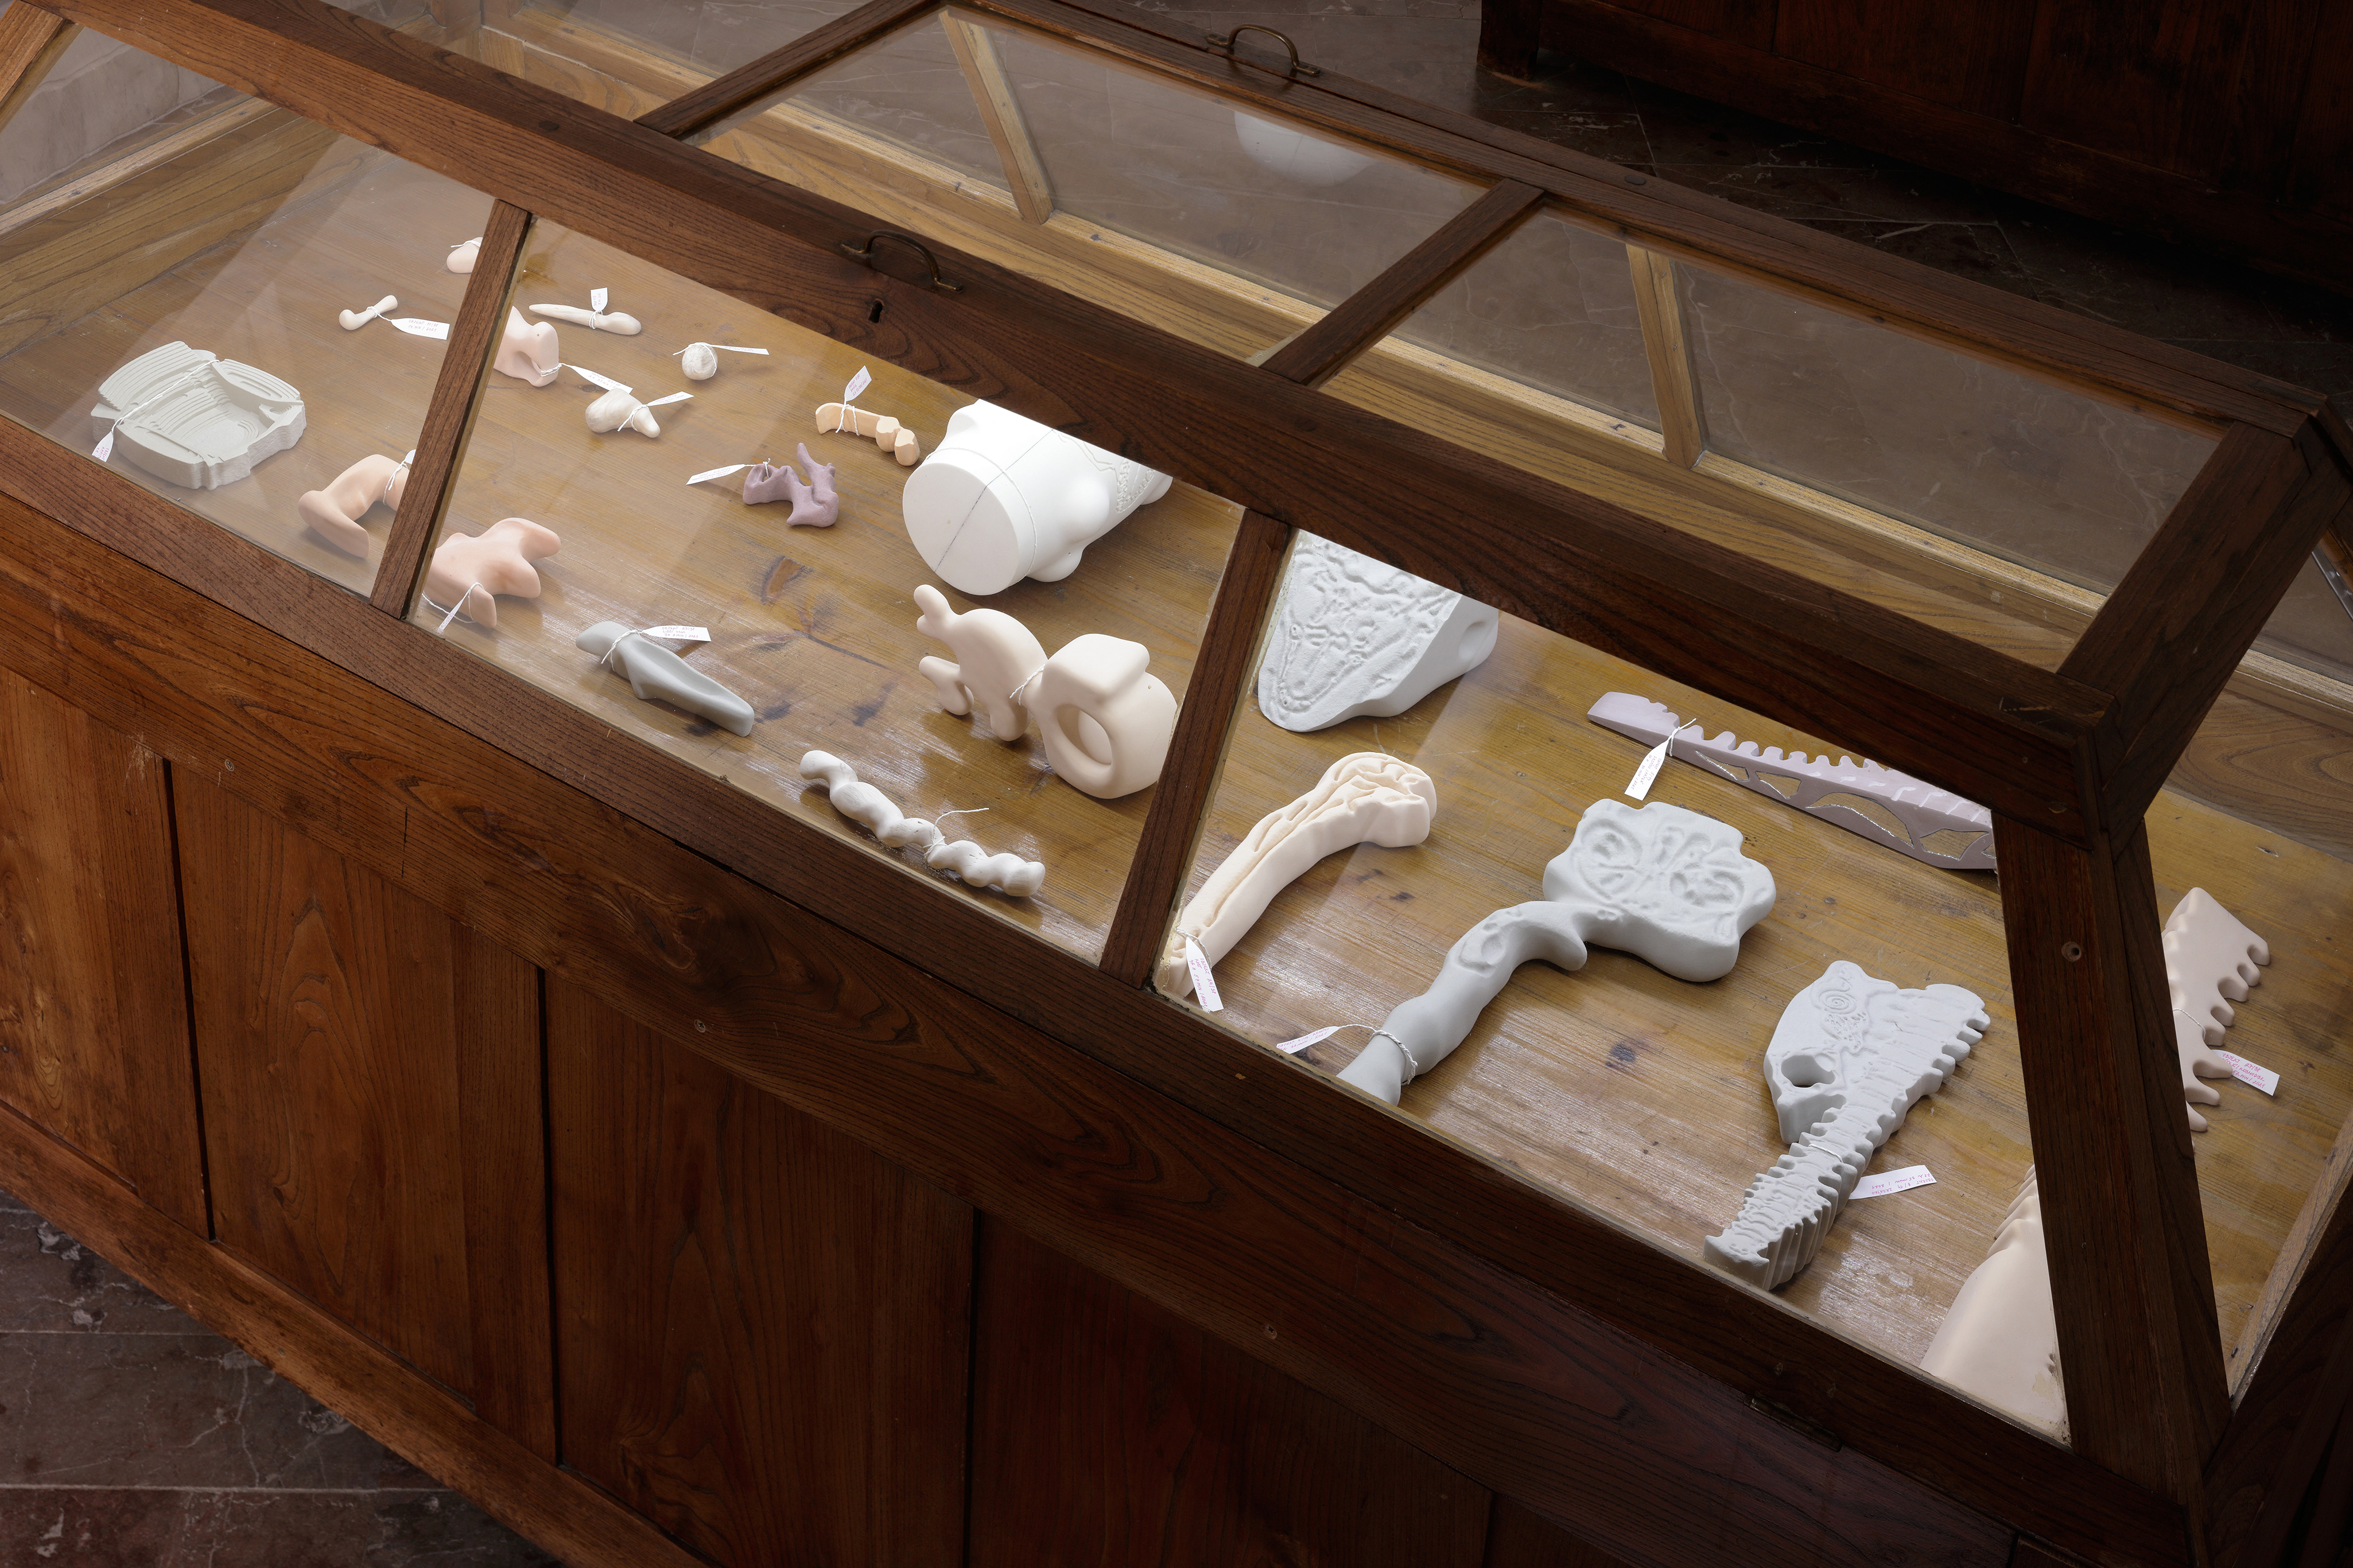 Photo of an art installation called Hands (and Other Products of Labor) 2.0 by Klára Čermáková (Mikulov Art Symposium, Mikulov, Czechia, 2021) [Detail no. 1]. A detailed look at the art objects in one of the “coffins.”